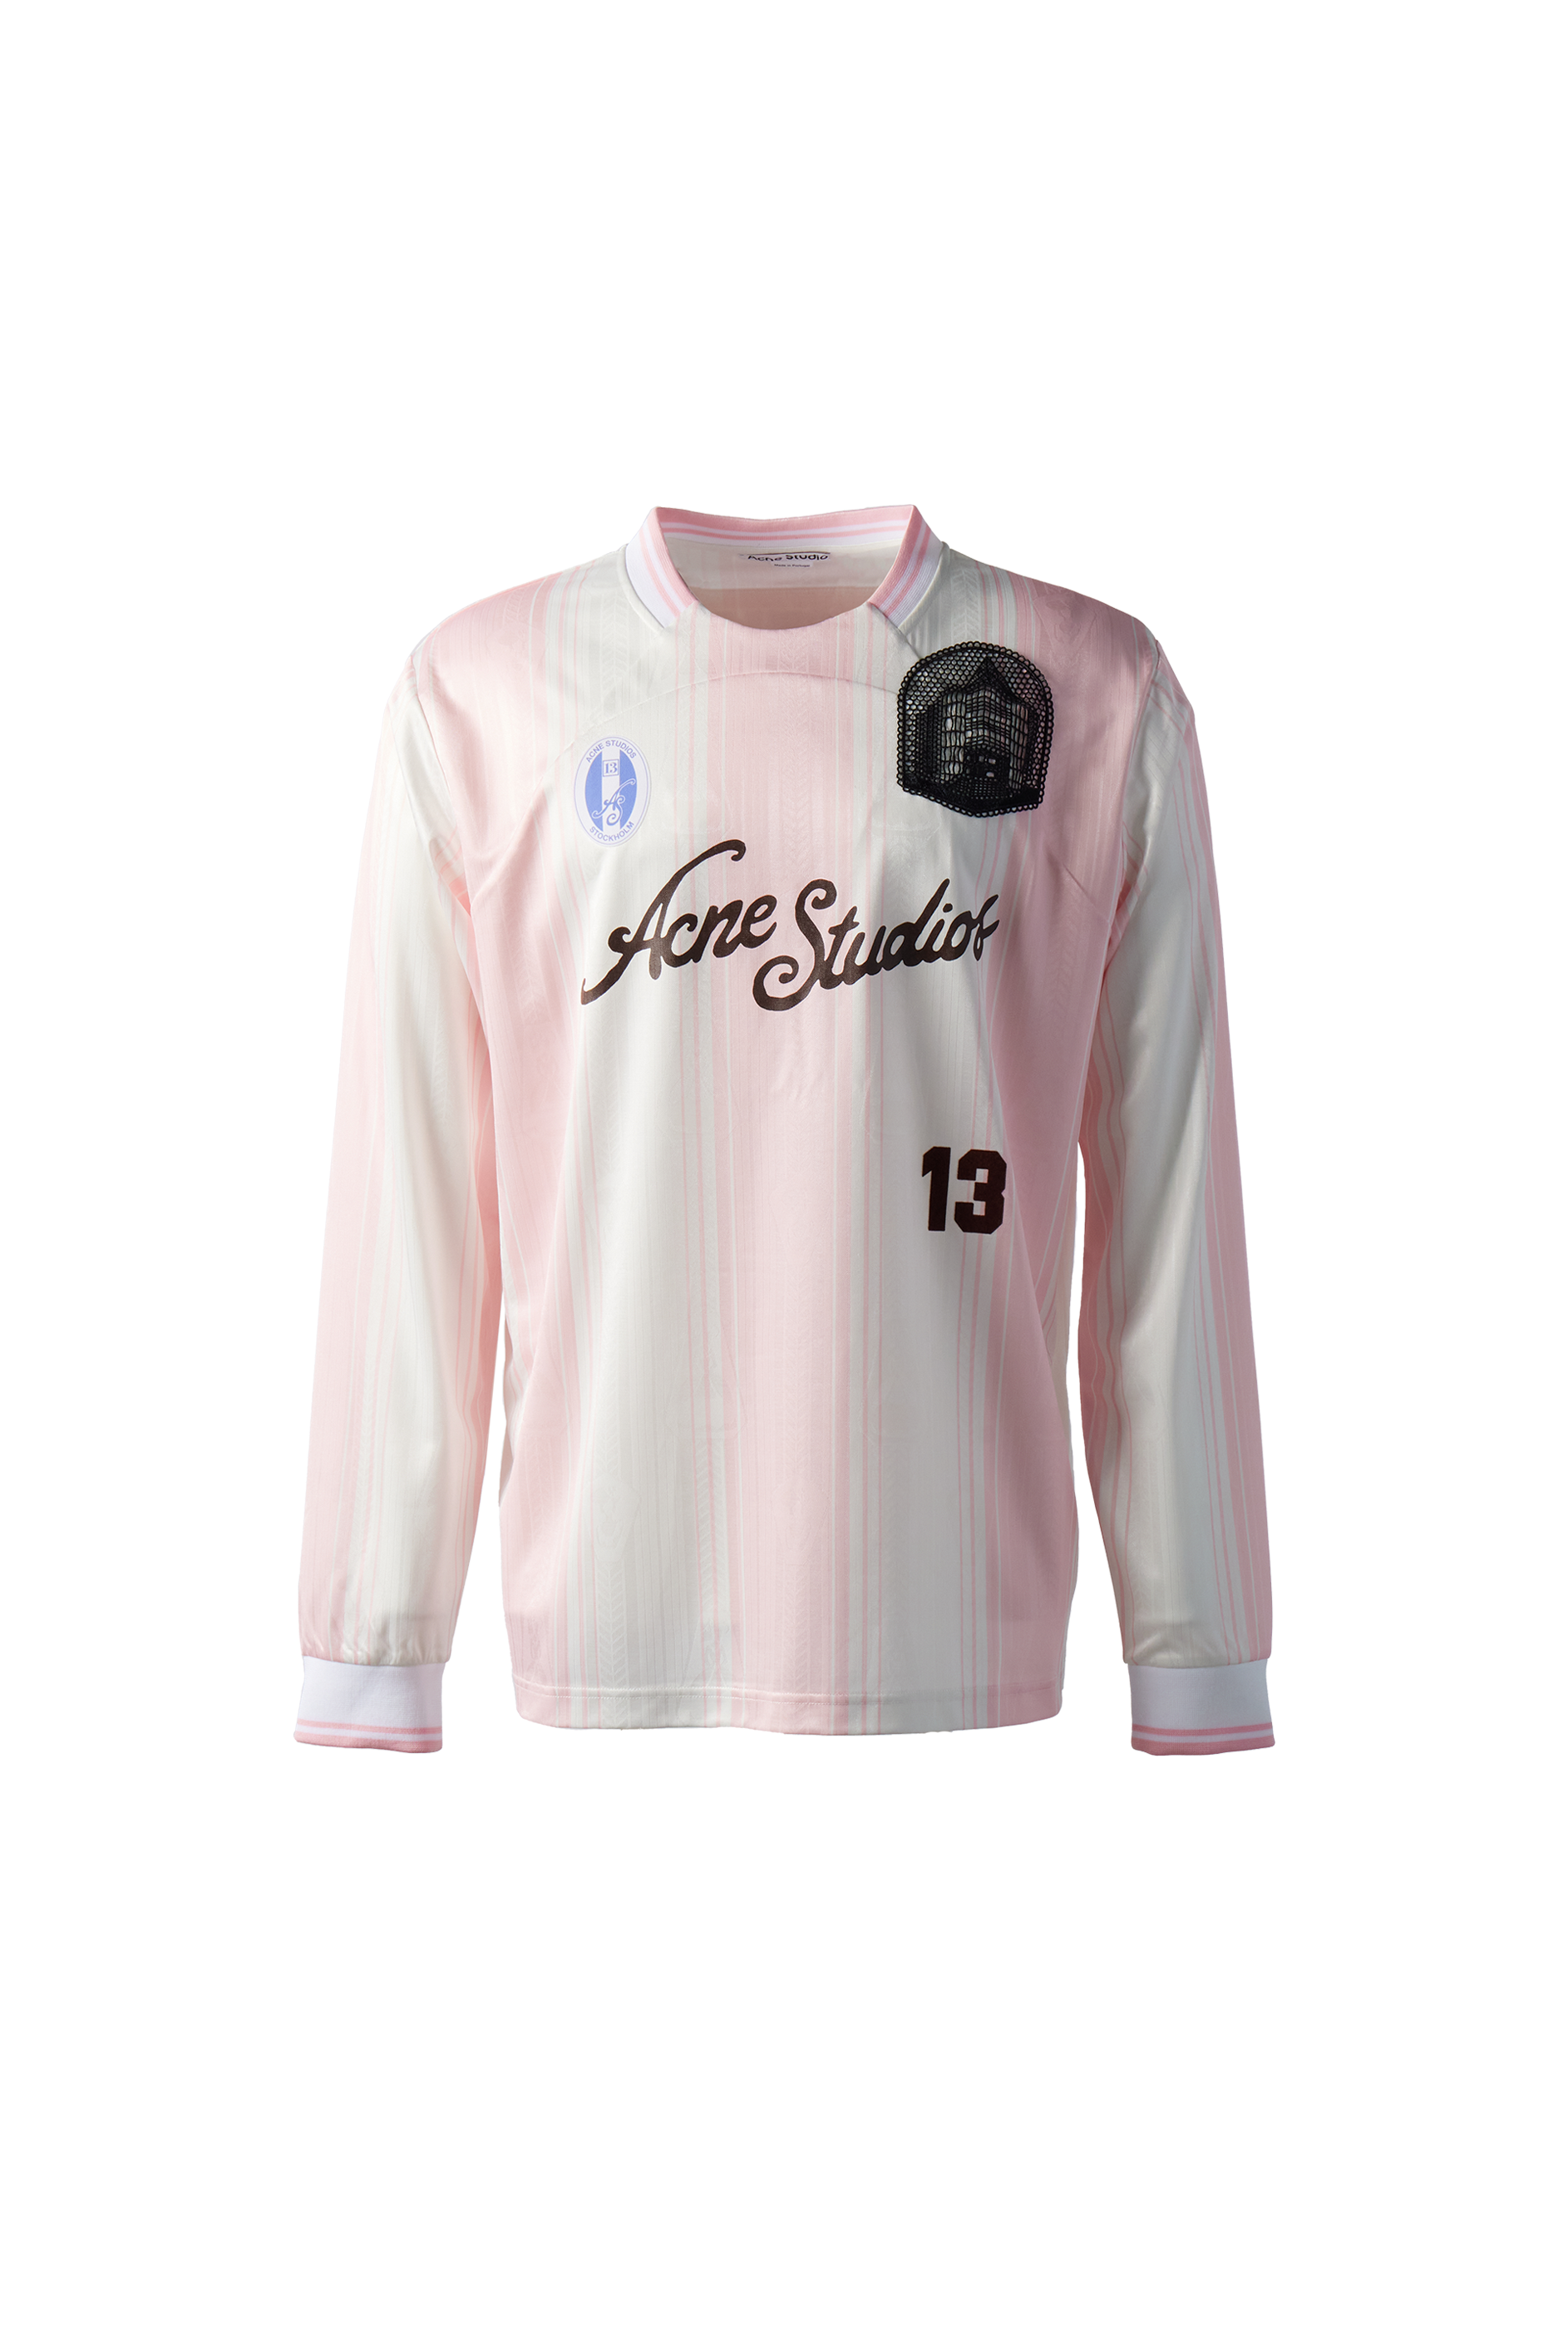 ACNE STUDIOS - L/S Football Top product image